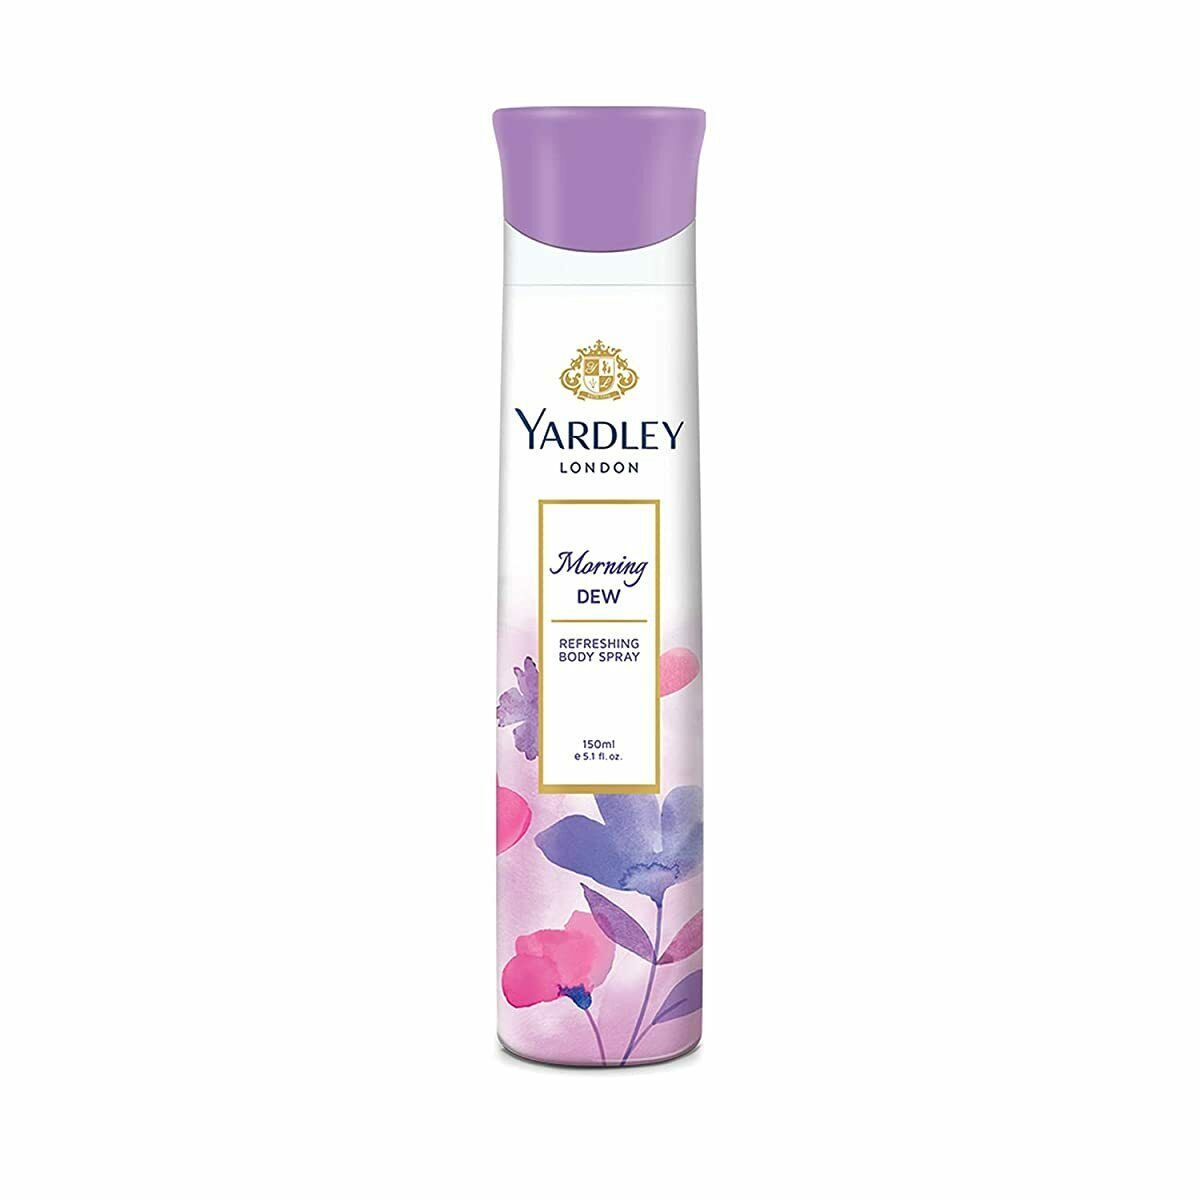 Primary image for Yardley London Morning Dew Refreshing Deo Body Spray for Women, 150ml